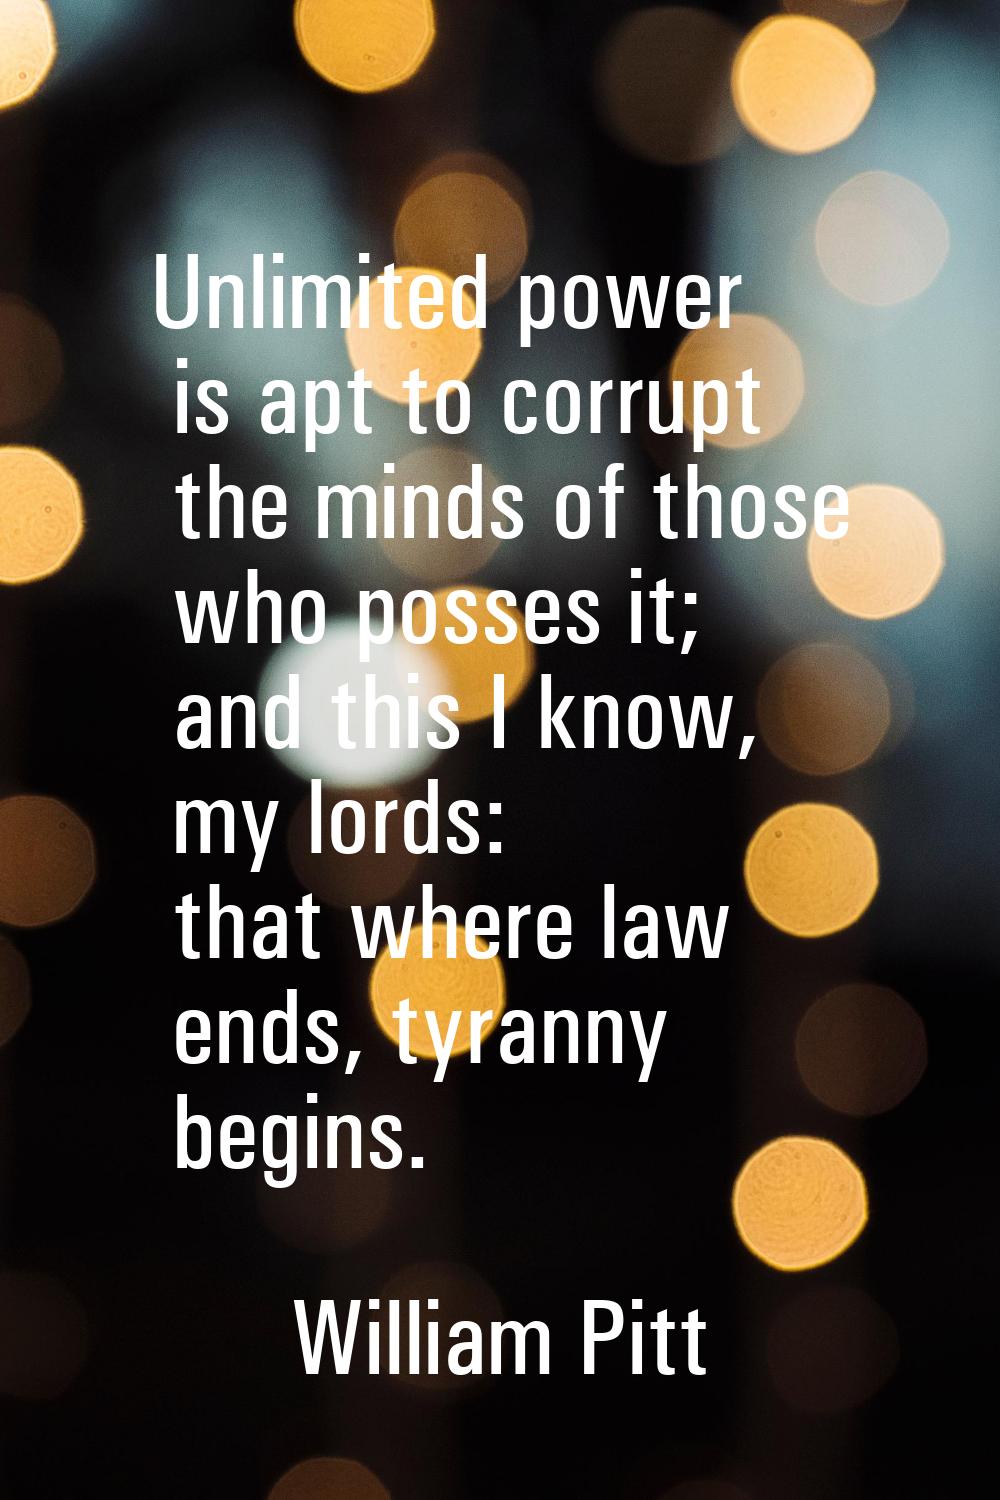 Unlimited power is apt to corrupt the minds of those who posses it; and this I know, my lords: that